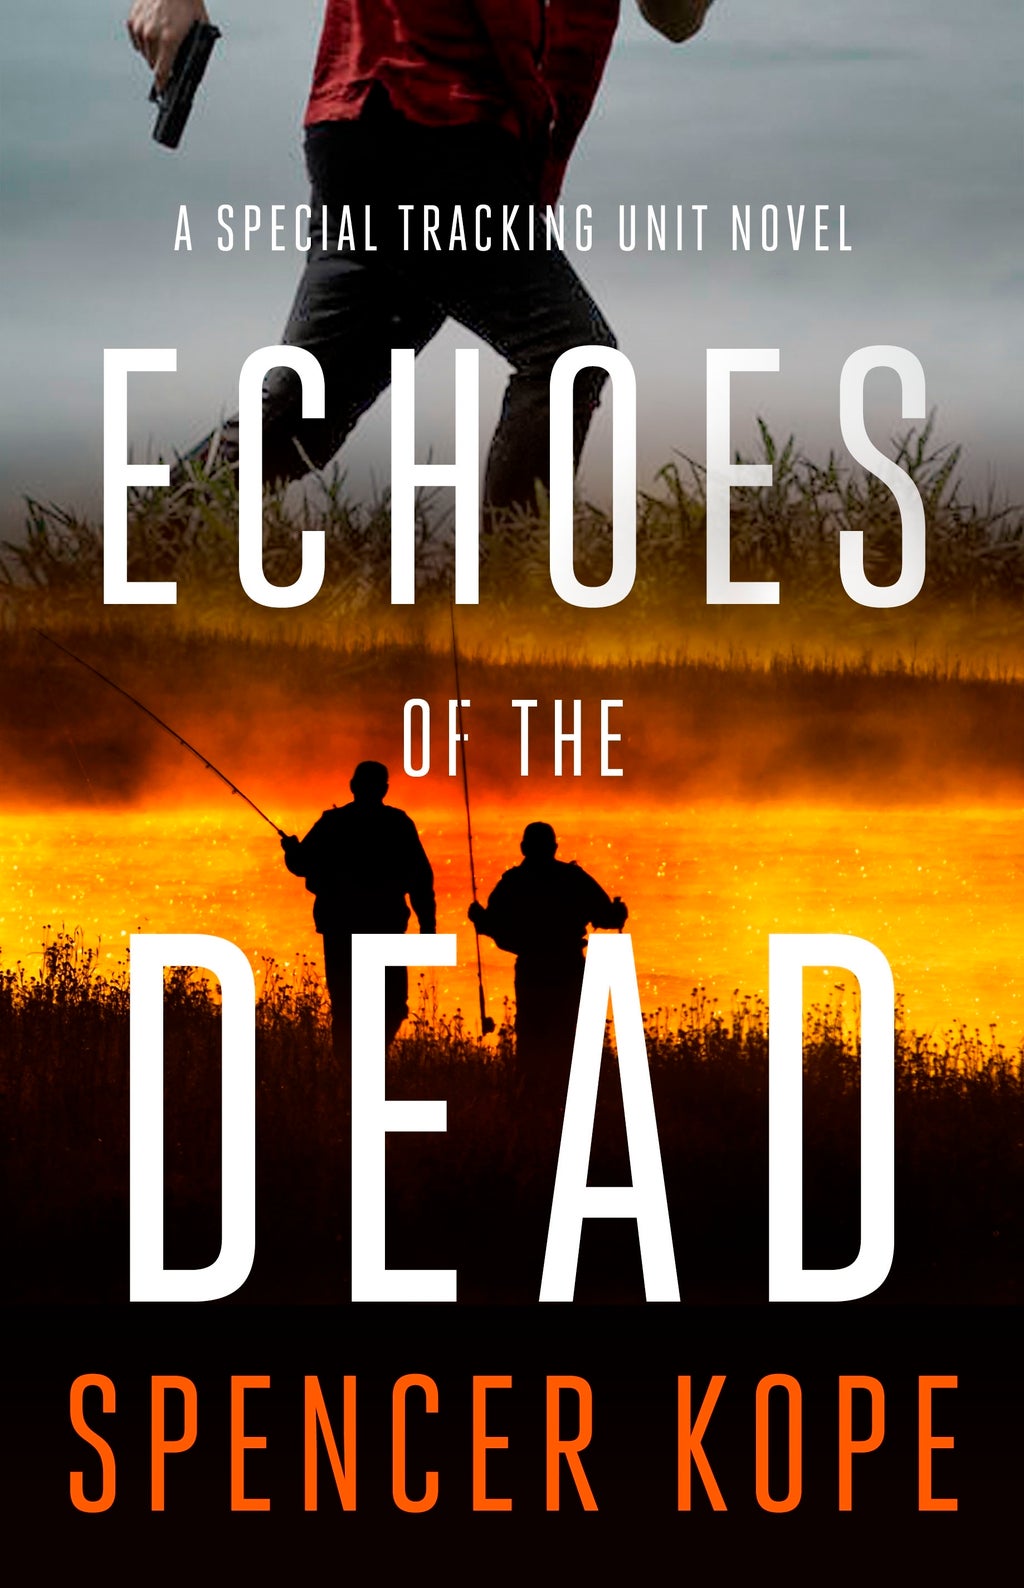 Review: Echoes of the Dead is a fast-paced thriller